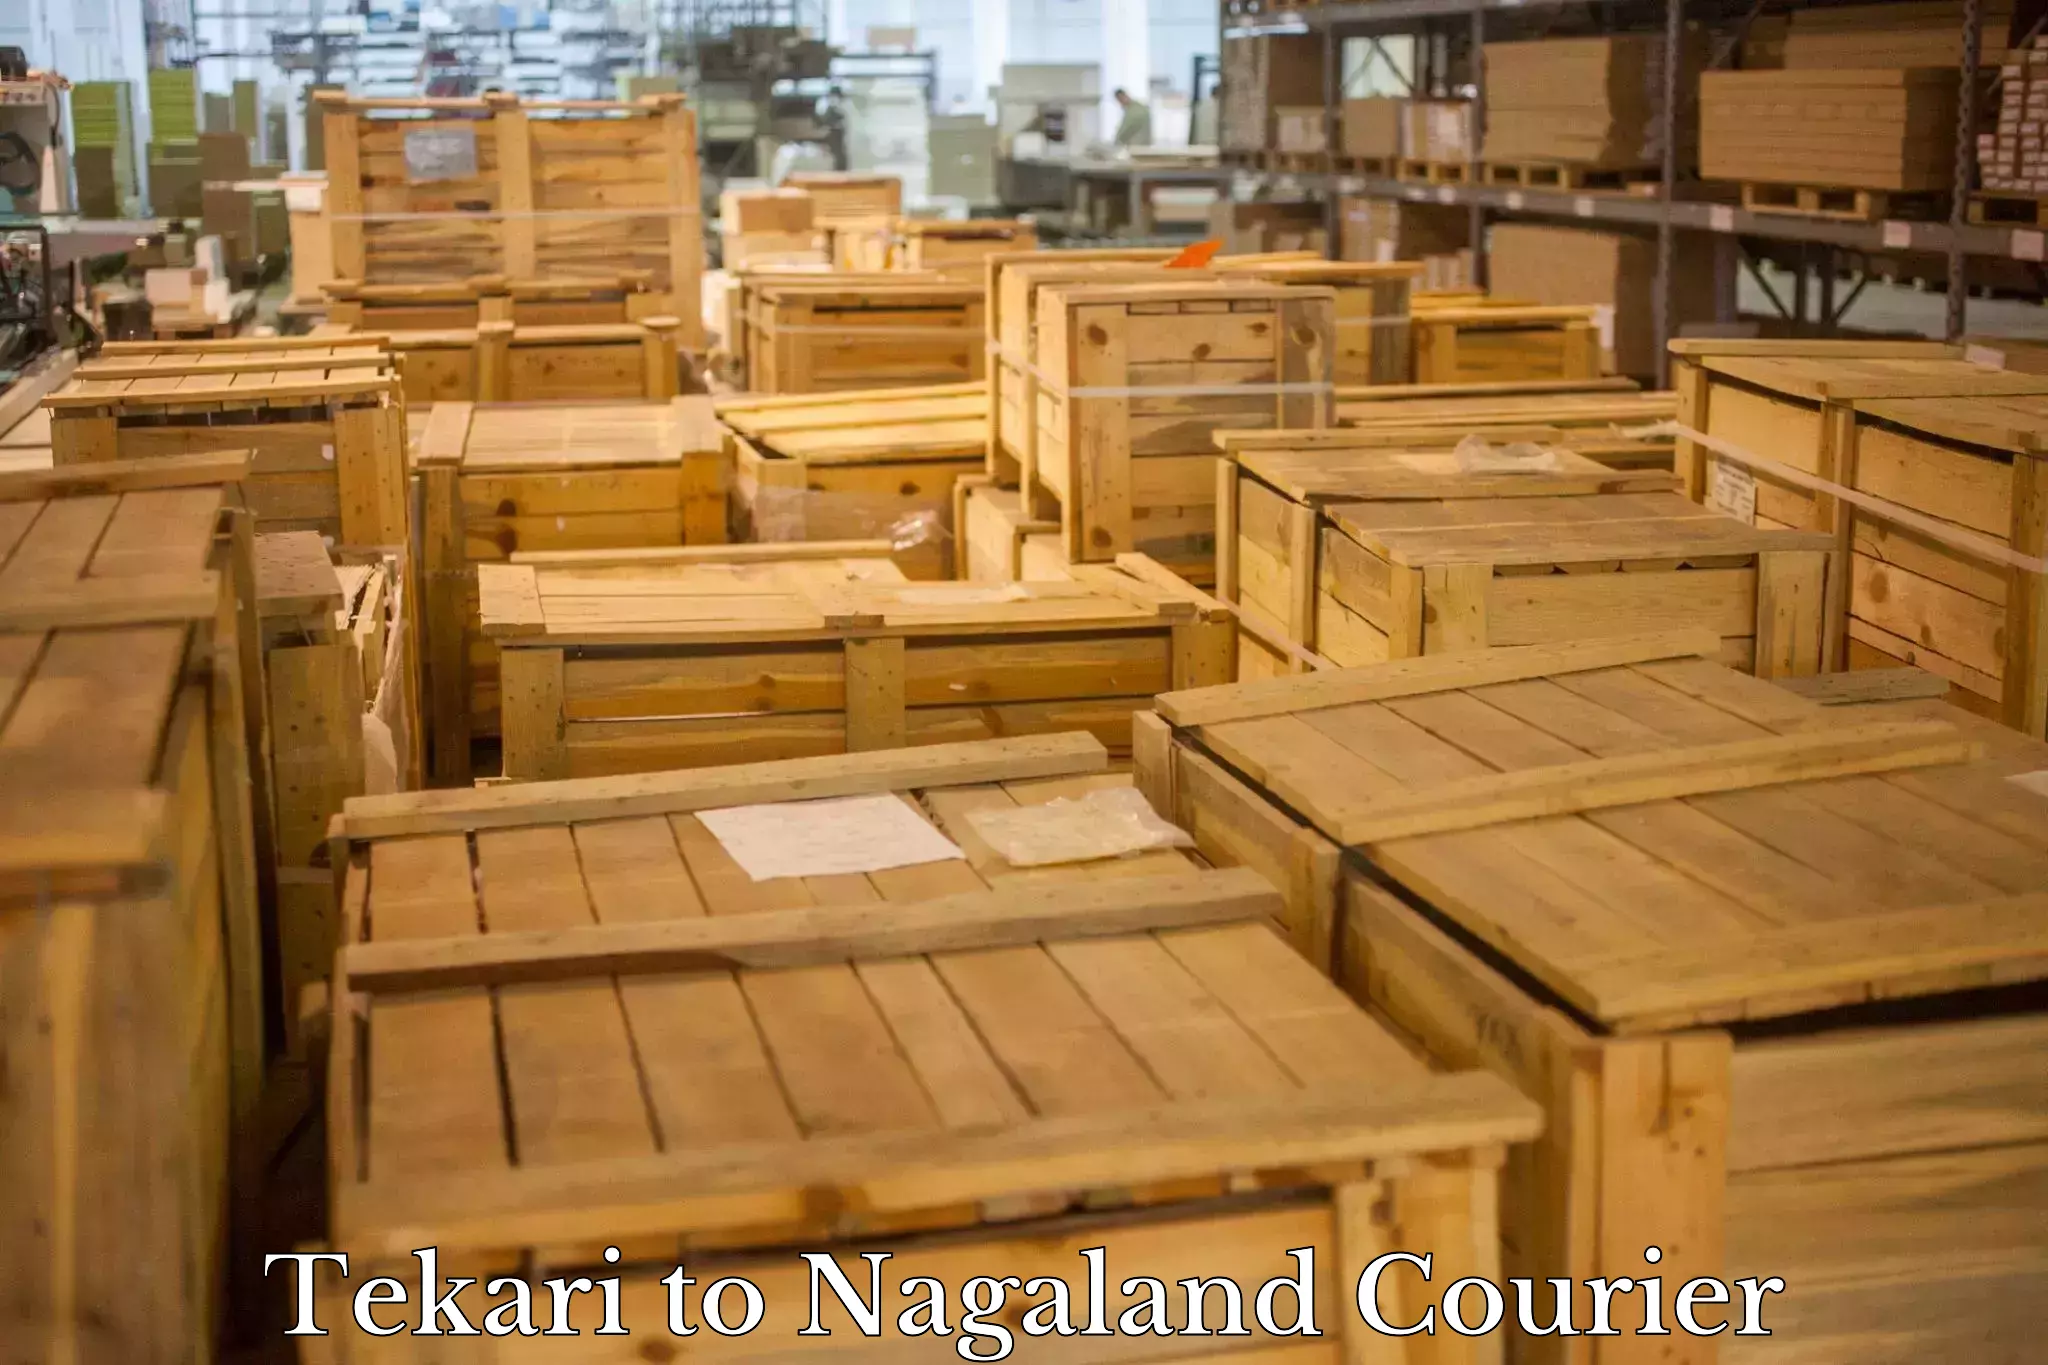 Multi-national courier services Tekari to Nagaland